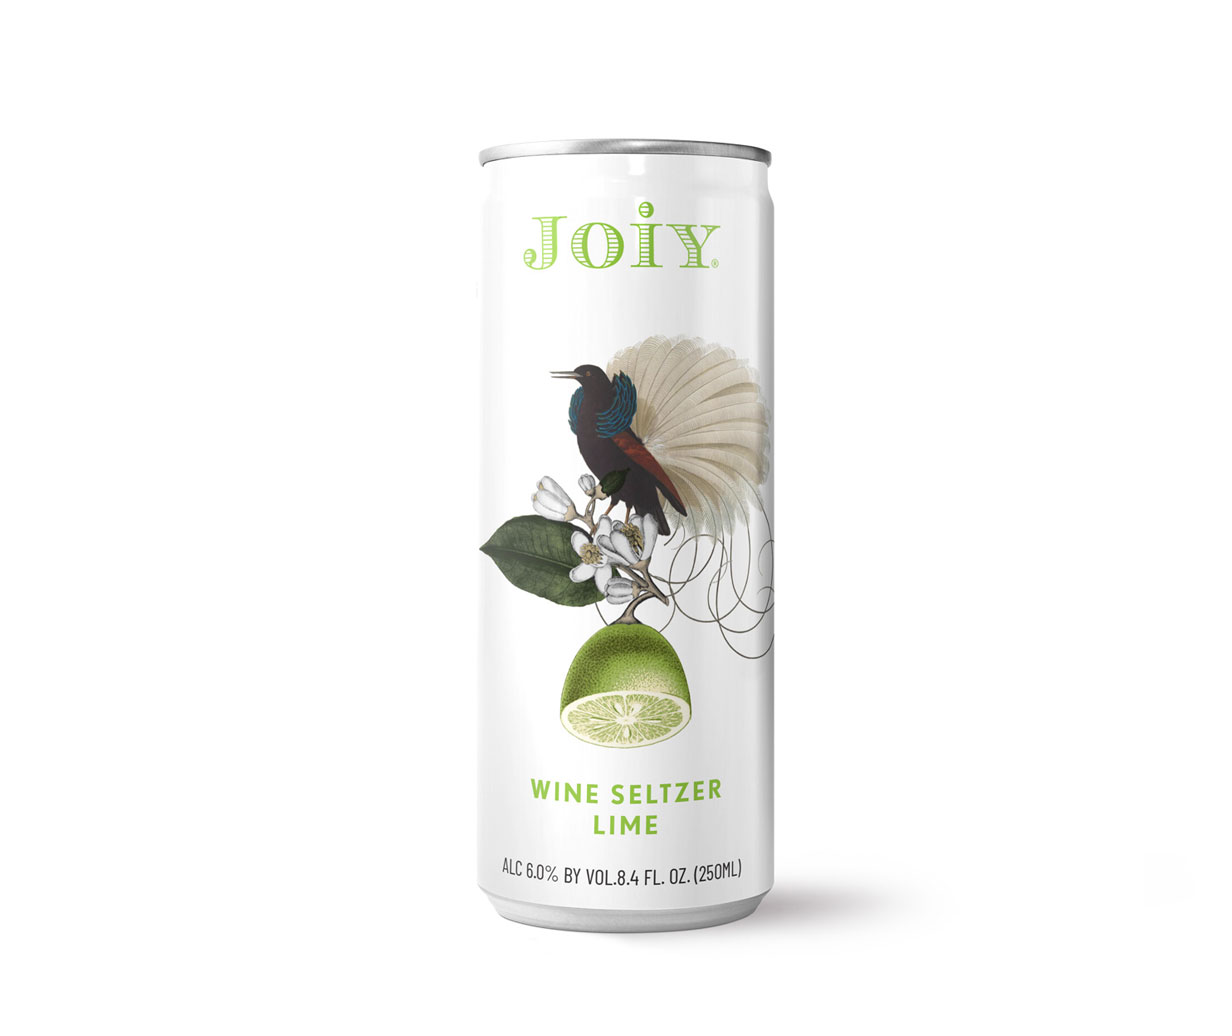 Joiy Canned Wine - Seltzer Lime (250ml)